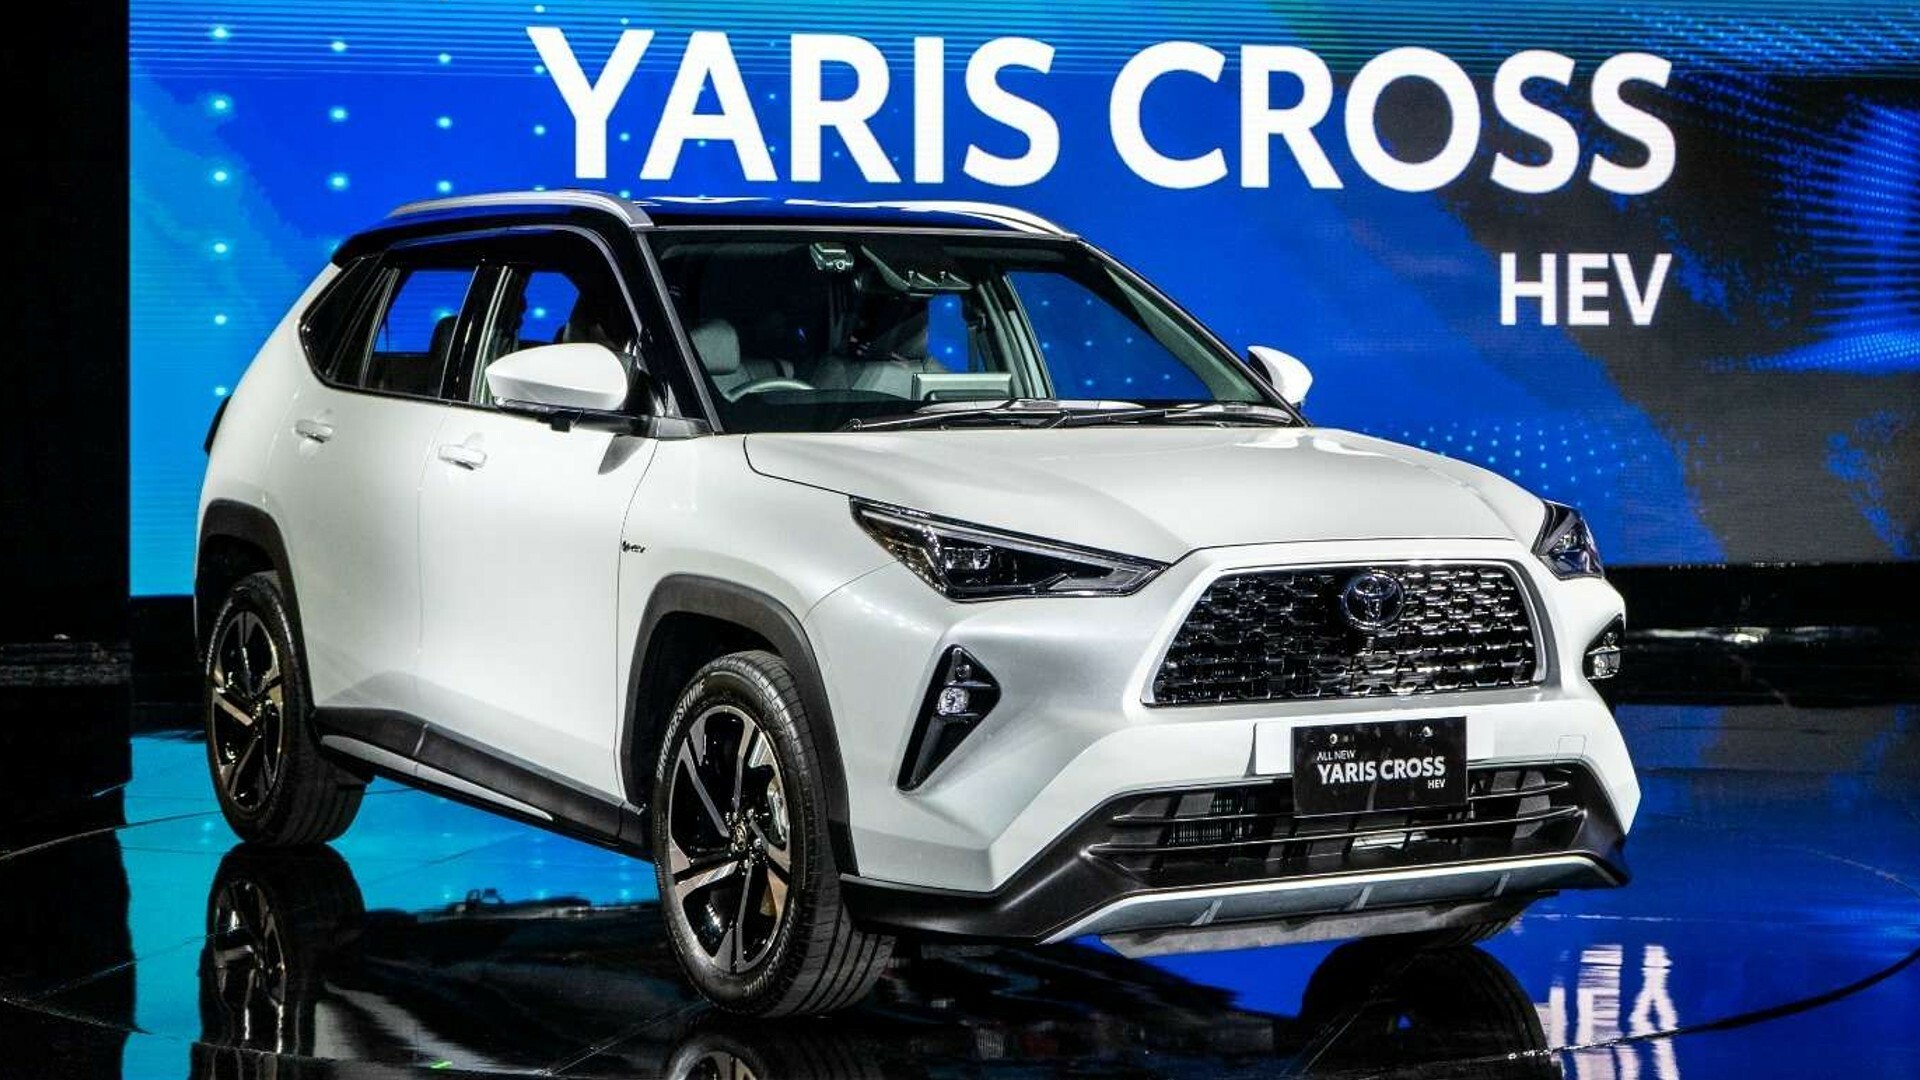 The Toyota Yaris Cross is a comfortable, stylish crossover